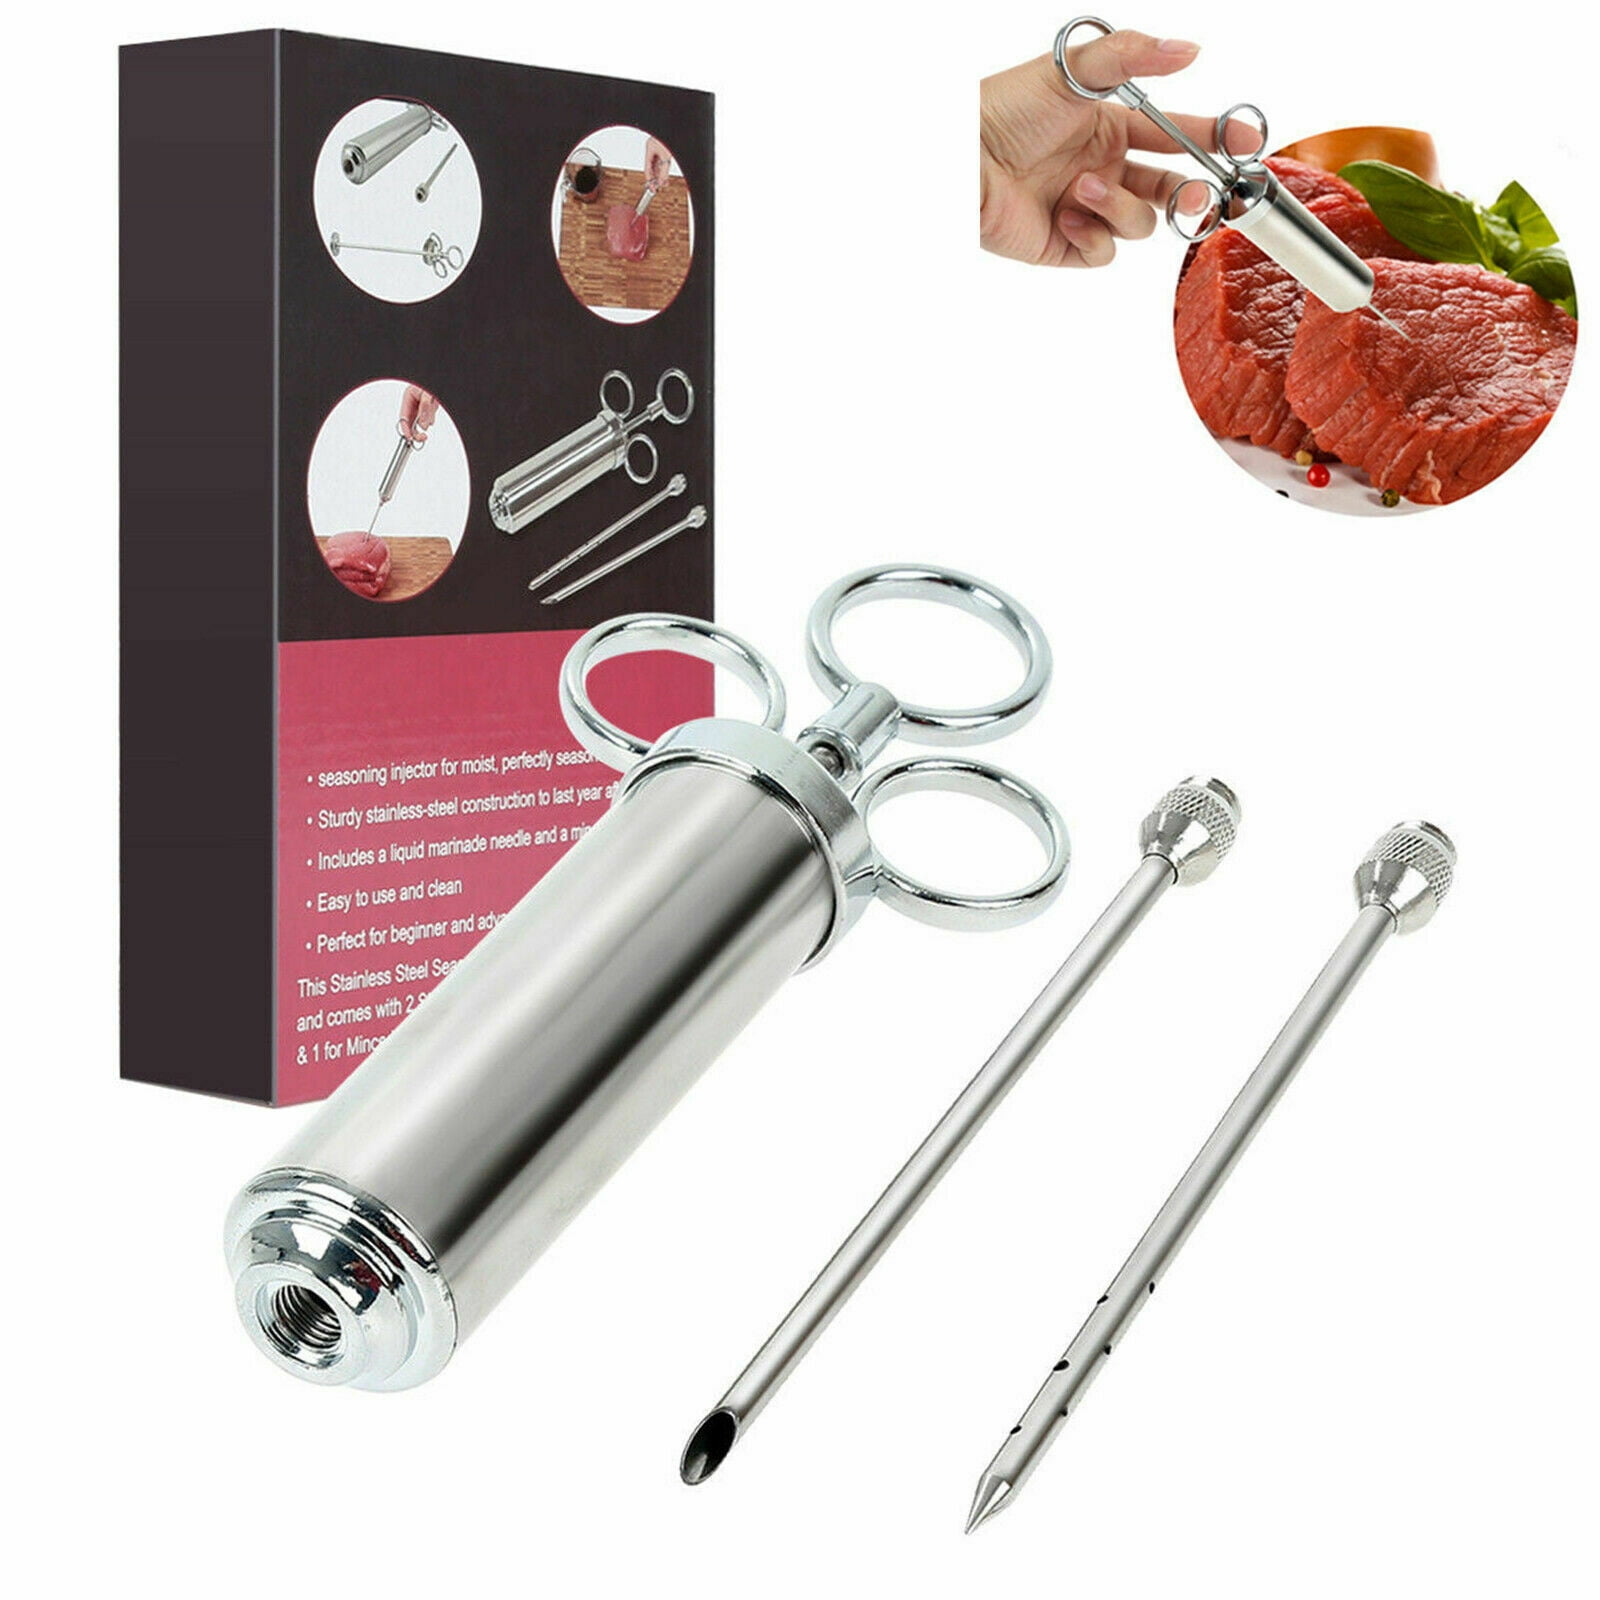 Deluxe Marinade Injector for Perfectly Seasoned BBQ – pocoro